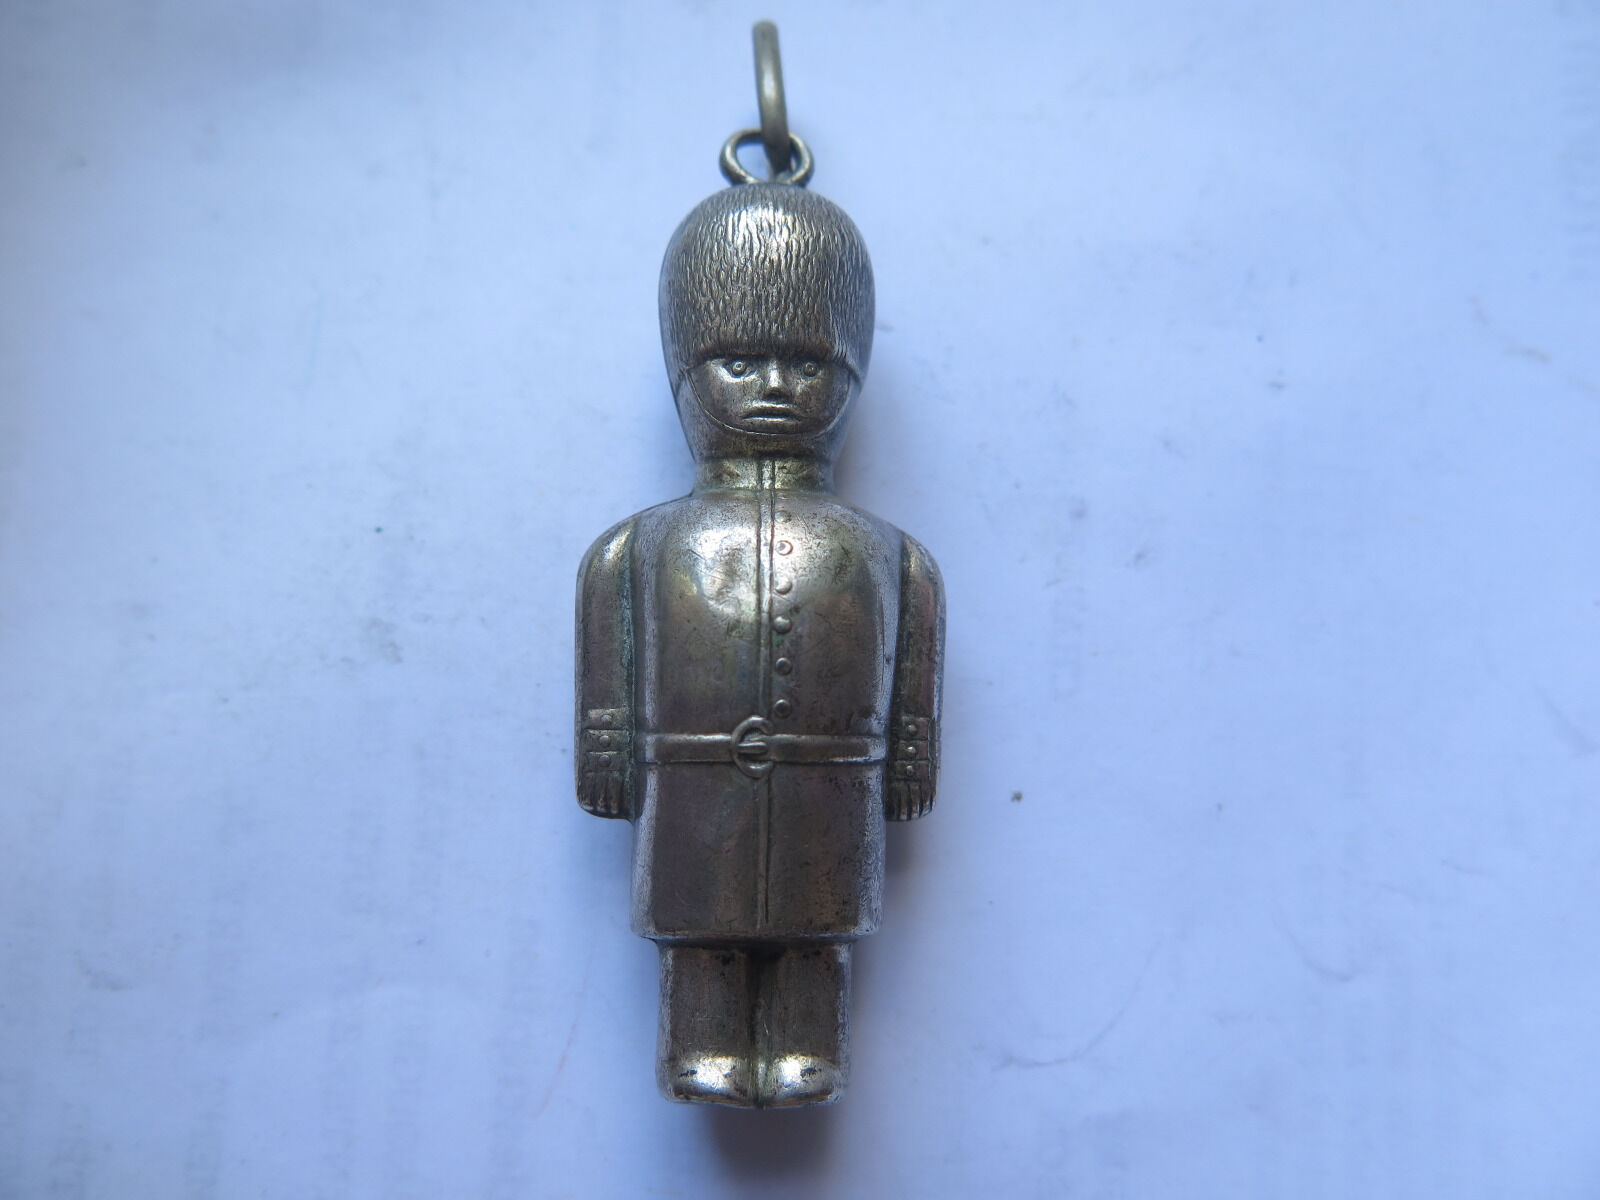 Complete Free Shipping EPNS BABY or BABIES RATTLE POLICEMAN of LONDON BOBBY Max 83% OFF SILVER